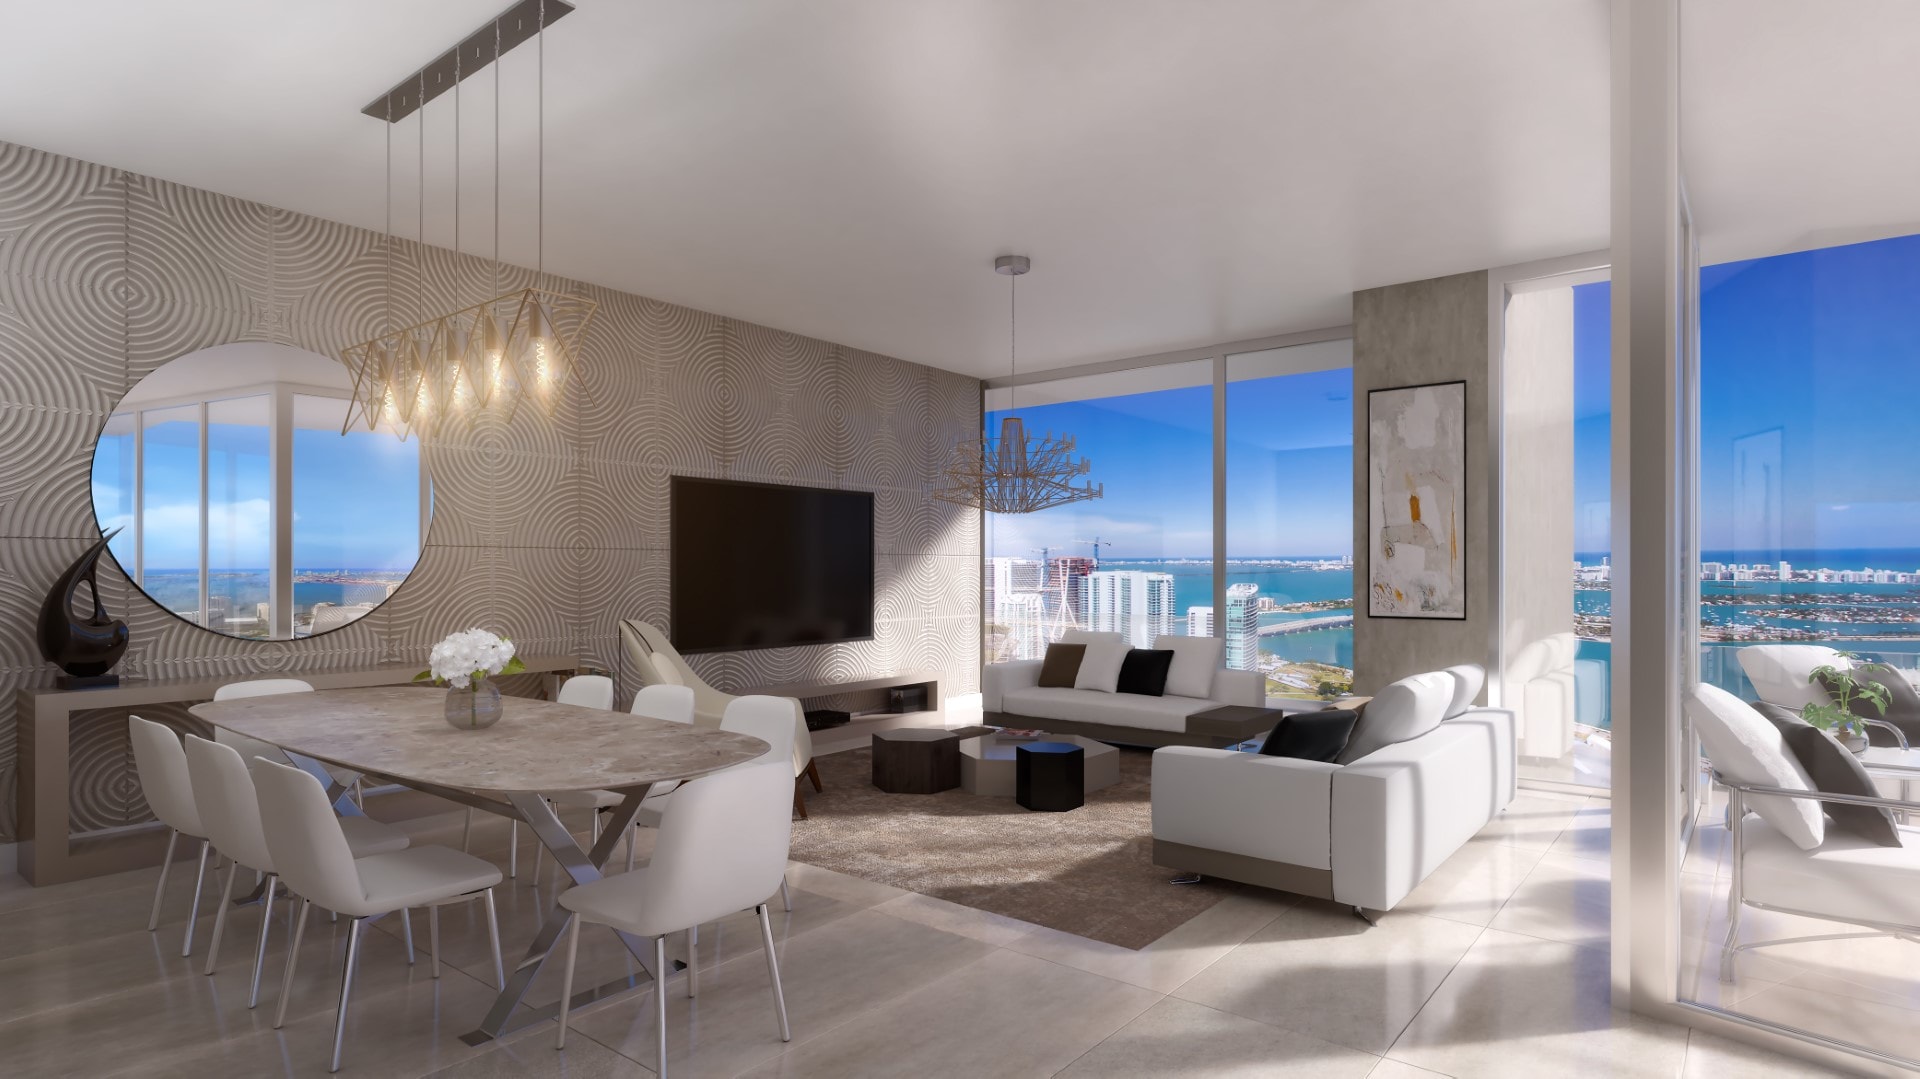 First Interior Renderings from Okan Tower is released; Construction is Planned This Year